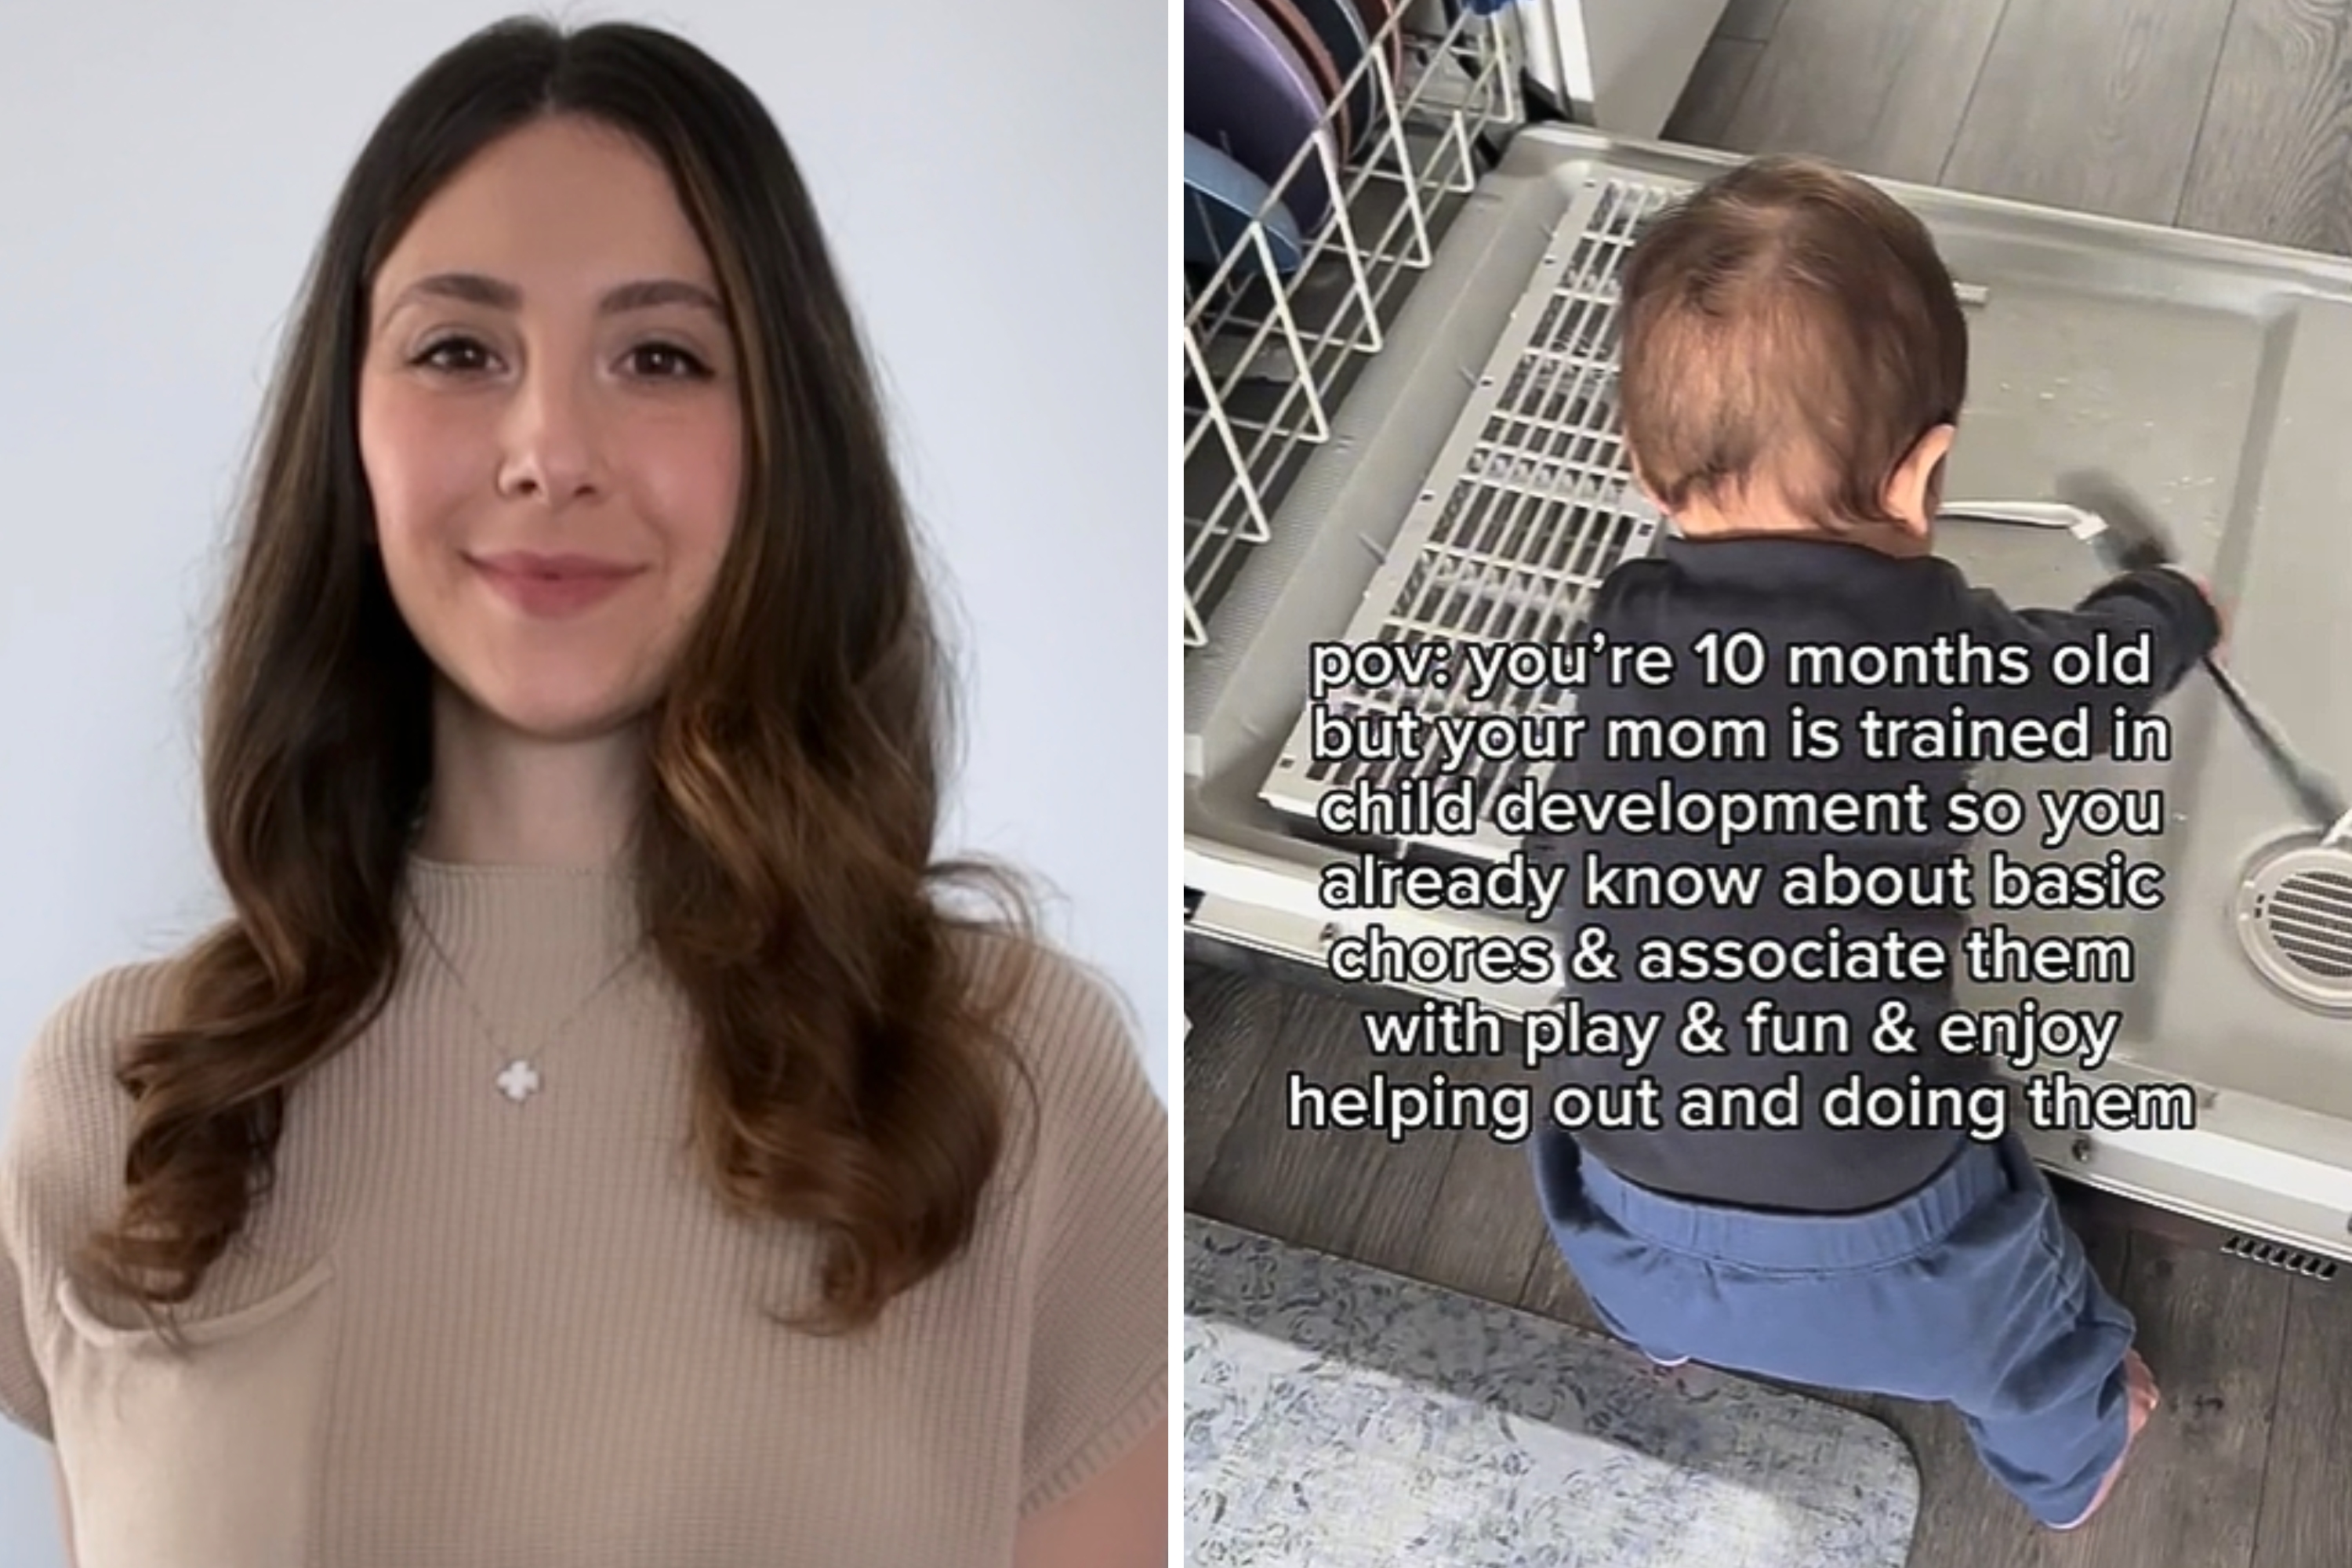 Mom gives 1-year-old son household chores to show babies “are capable”